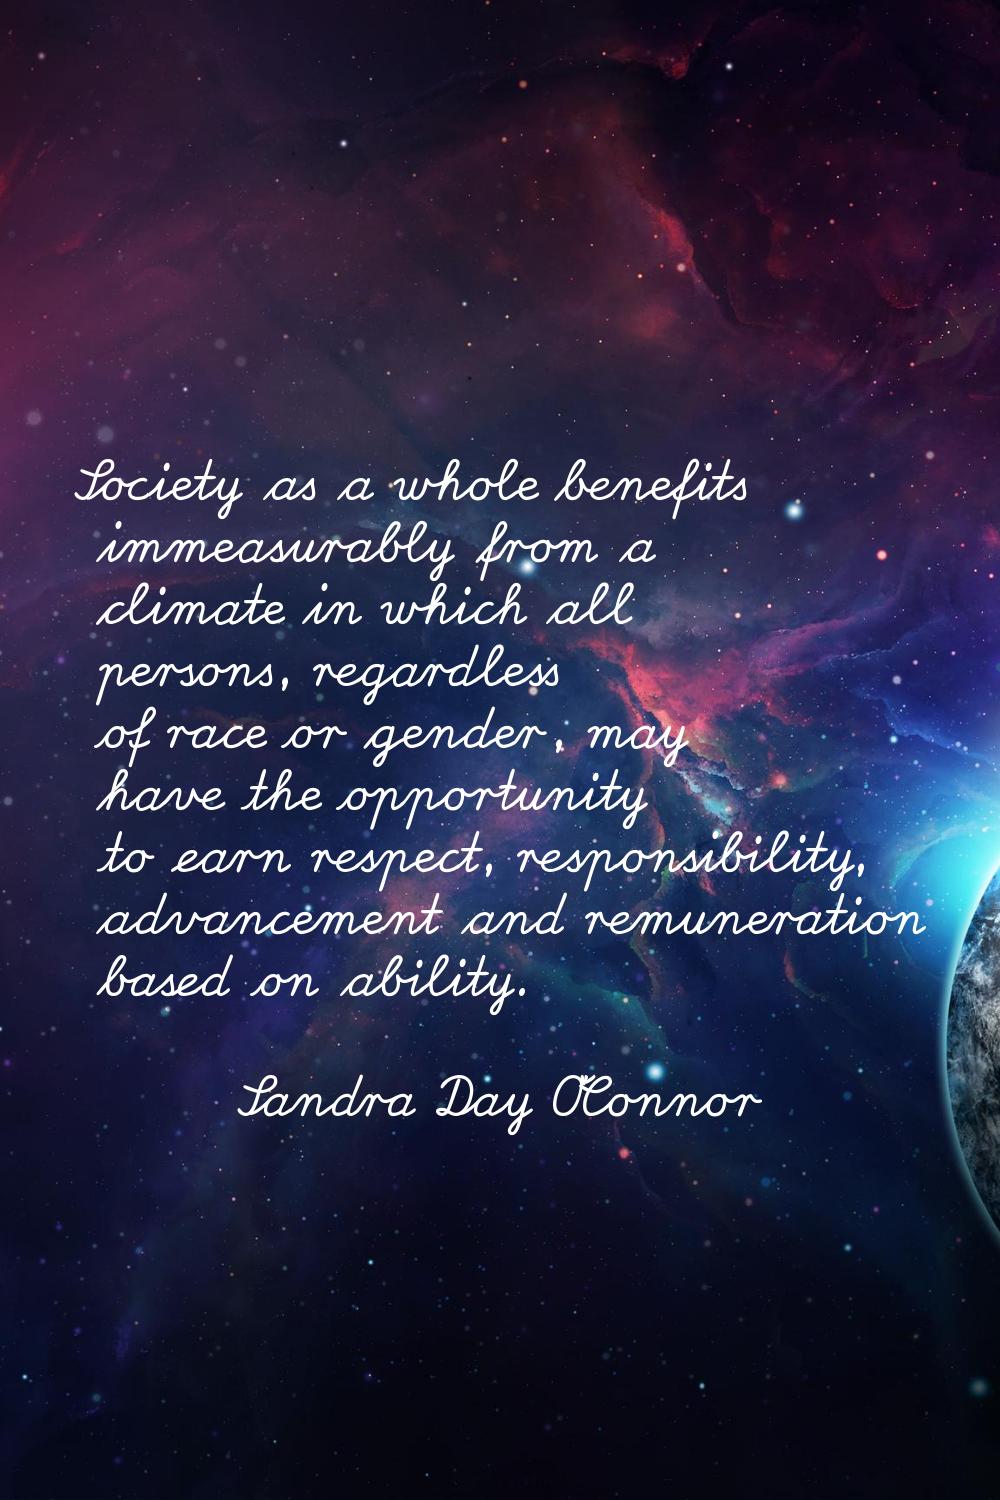 Society as a whole benefits immeasurably from a climate in which all persons, regardless of race or